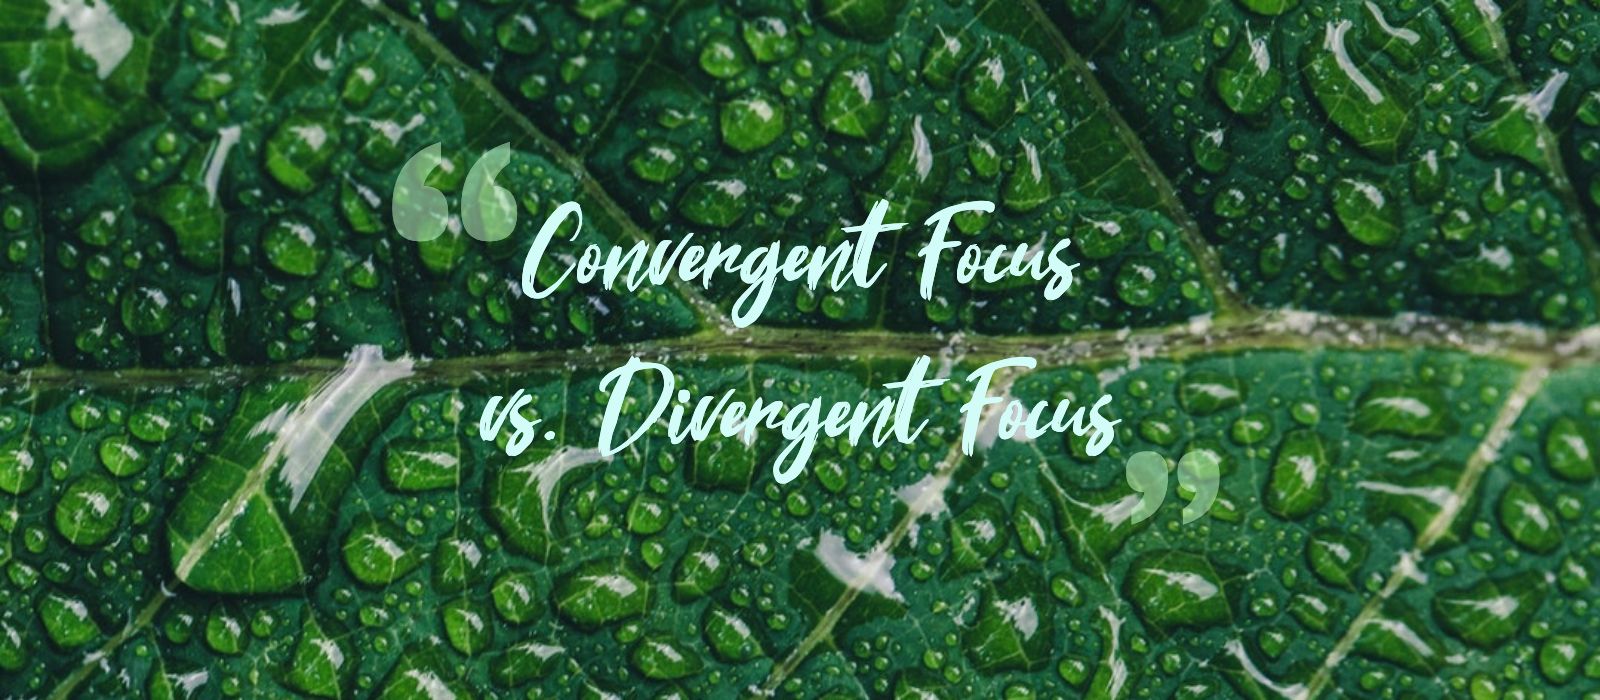 Divergent Focus vs Convergent Focus: What’s the difference?